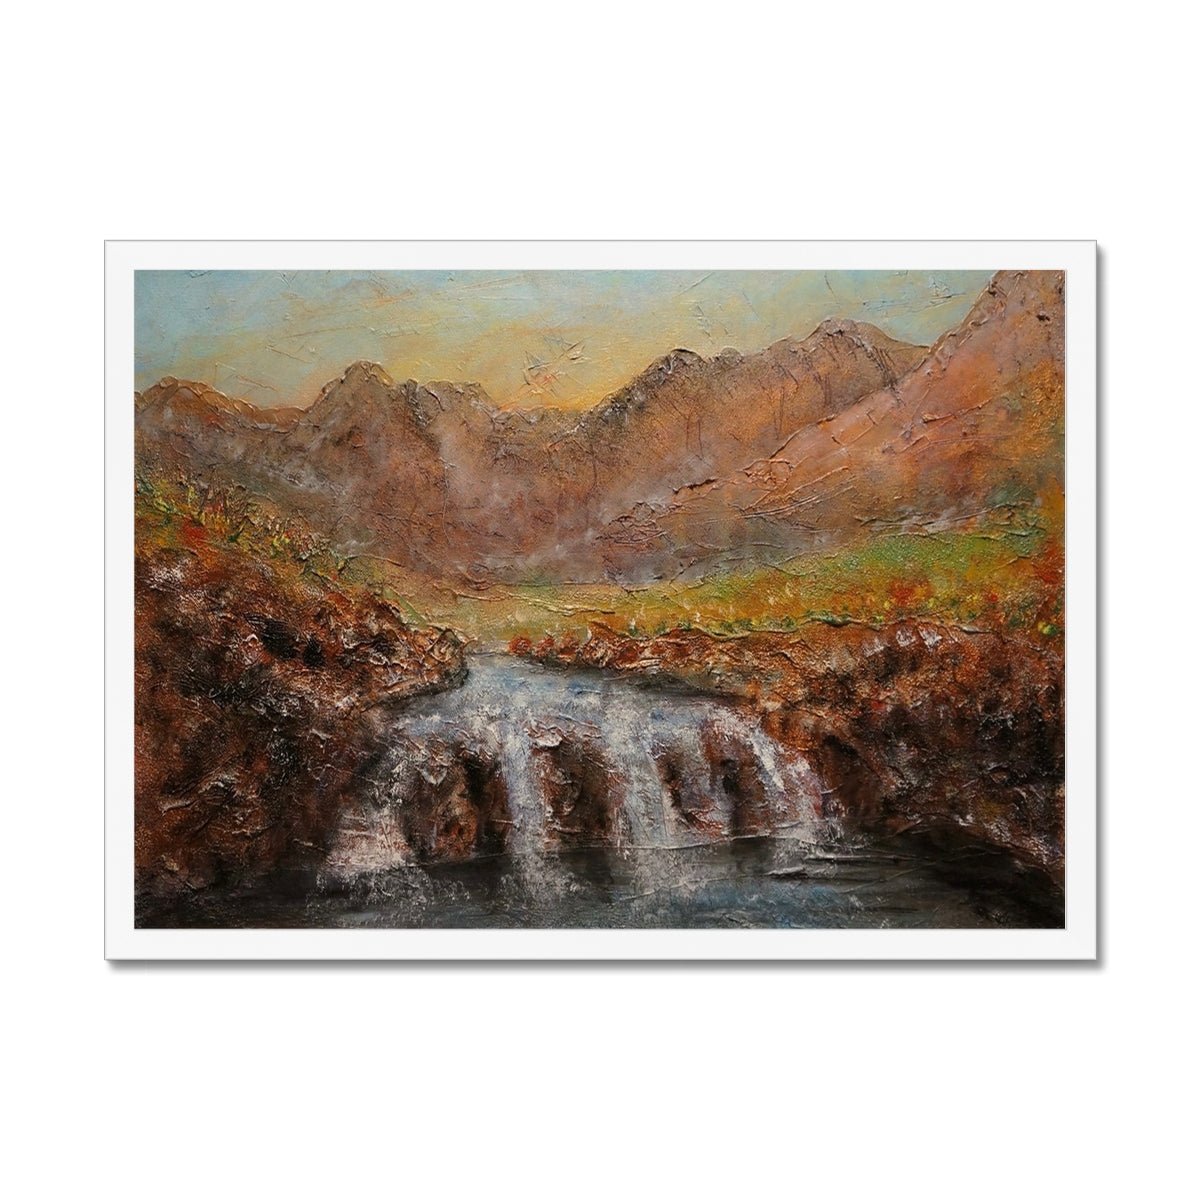 Fairy Pools Dawn Skye Painting | Framed Prints From Scotland-Framed Prints-Skye Art Gallery-A2 Landscape-White Frame-Paintings, Prints, Homeware, Art Gifts From Scotland By Scottish Artist Kevin Hunter